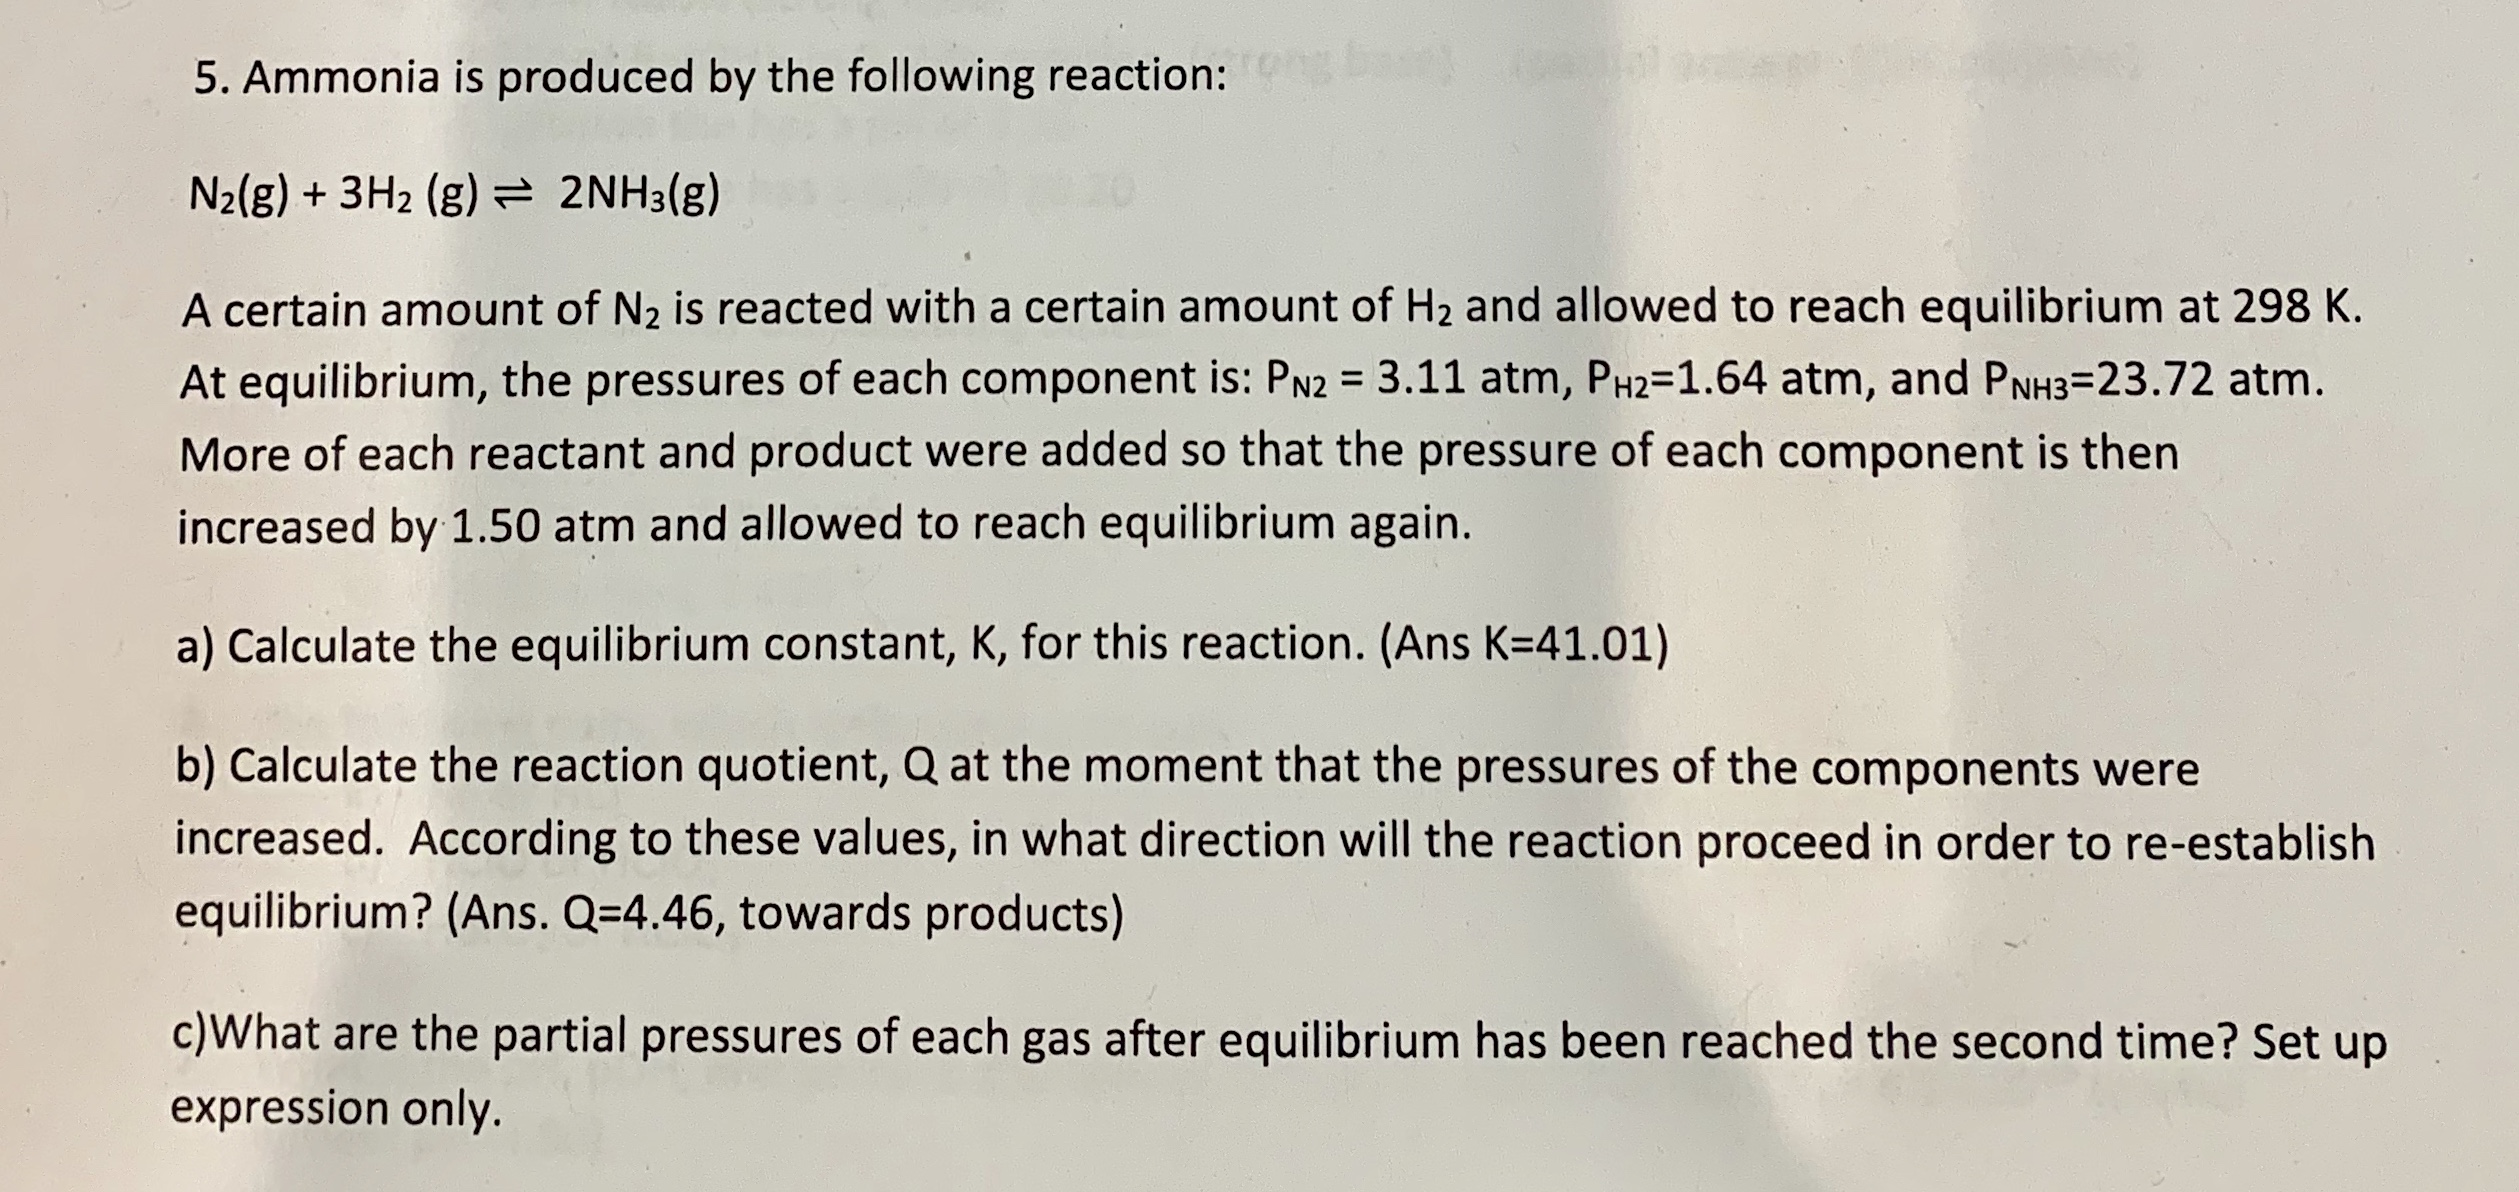 5. Ammonia is produced by the following reaction:
N2(g) +3H2 (g)
2NH3(g)
A certain amount of N2 is reacted with a certain amount of H2 and allowed to reach equilibrium at 298 K.
At equilibrium, the pressures of each component is: PN2 3.11 atm, PH2-1.64 atm, and PNH3-23.72 atm.
More of each reactant and product were added so that the pressure of each component is then
increased by 1.50 atm and allowed to reach equilibrium again.
a) Calculate the equilibrium constant, K, for this reaction. (Ans K=41.01)
b) Calculate the reaction quotient, Q at the moment that the pressures of the components were
increased. According to these values, in what direction will the reaction proceed in order to re-establish
equilibrium? (Ans. Q-4.46, towards products)
c)What are the partial pressures of each gas after equilibrium has been reached the second time? Set up
expression only.
